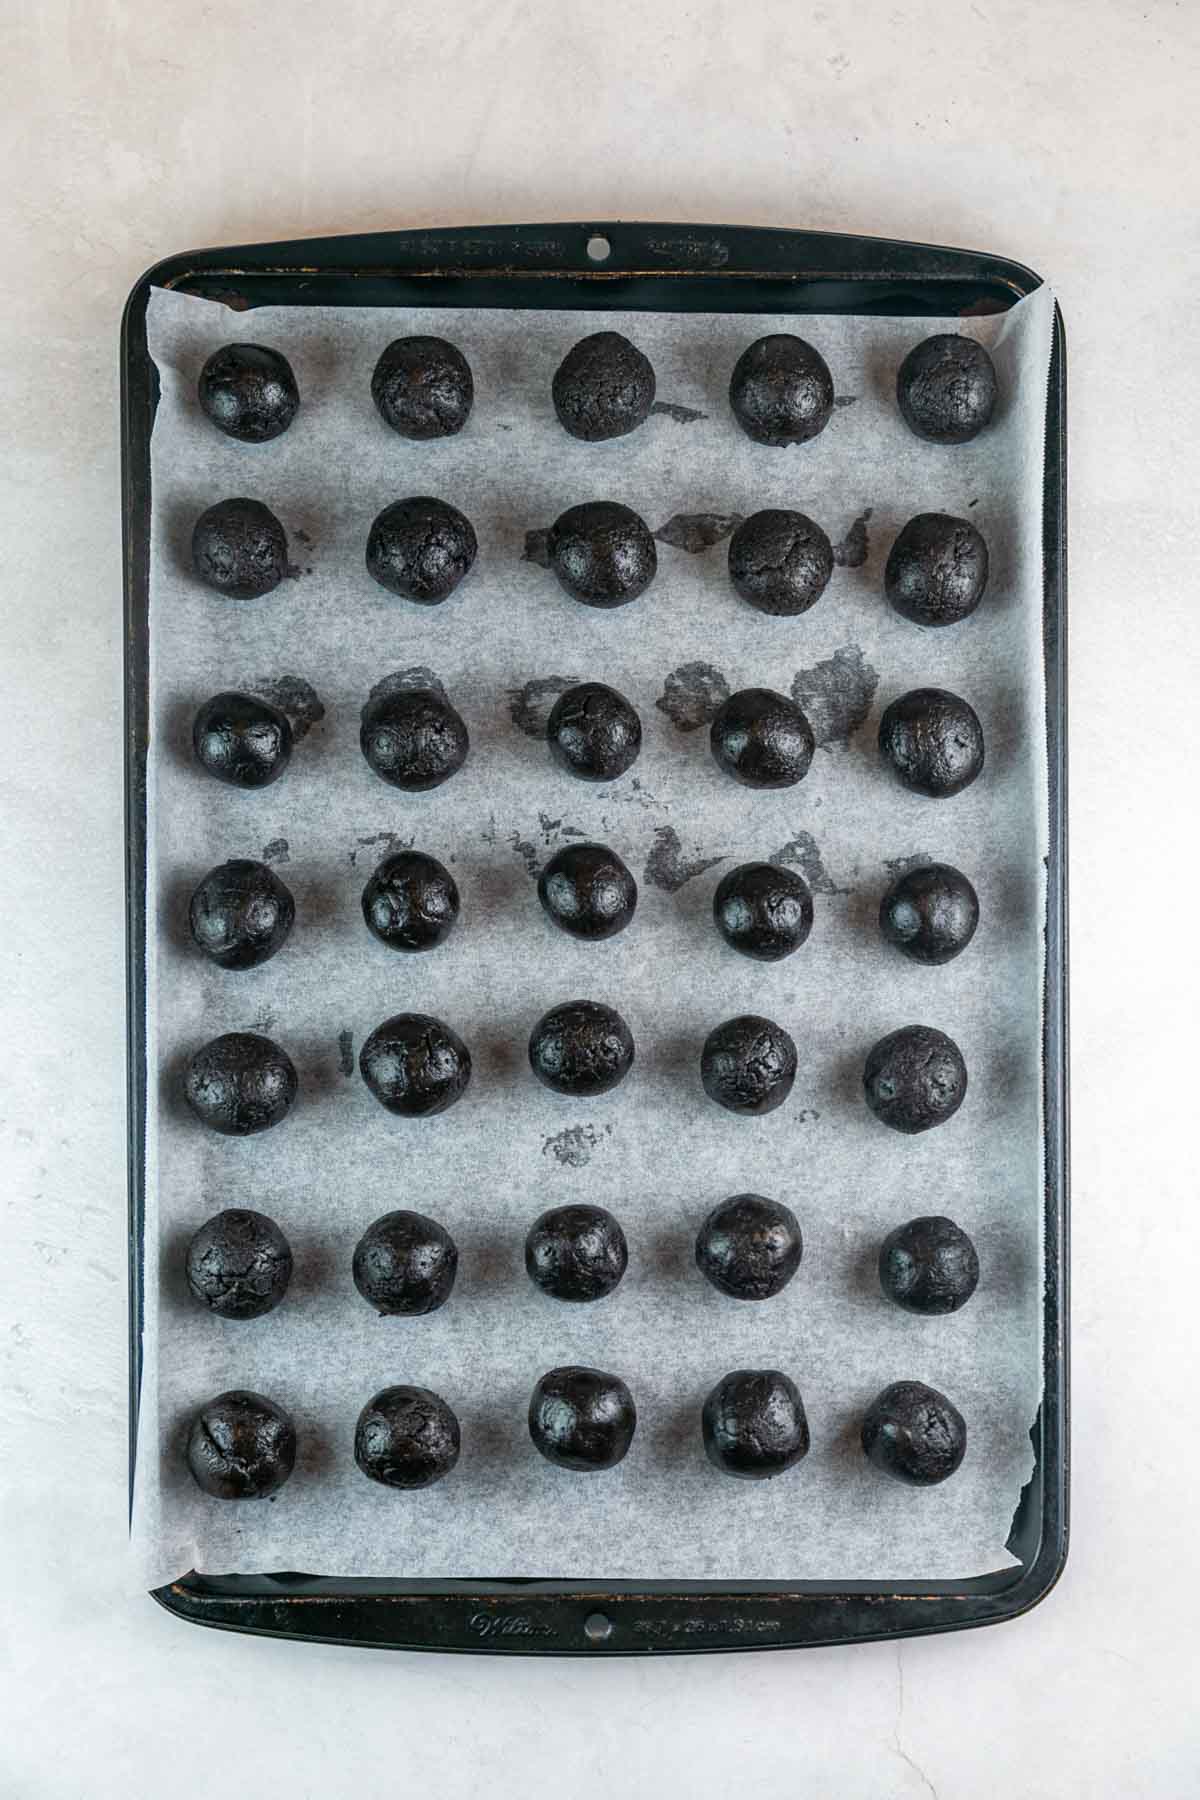 uncoated oreo truffles lined up on a cookie sheet